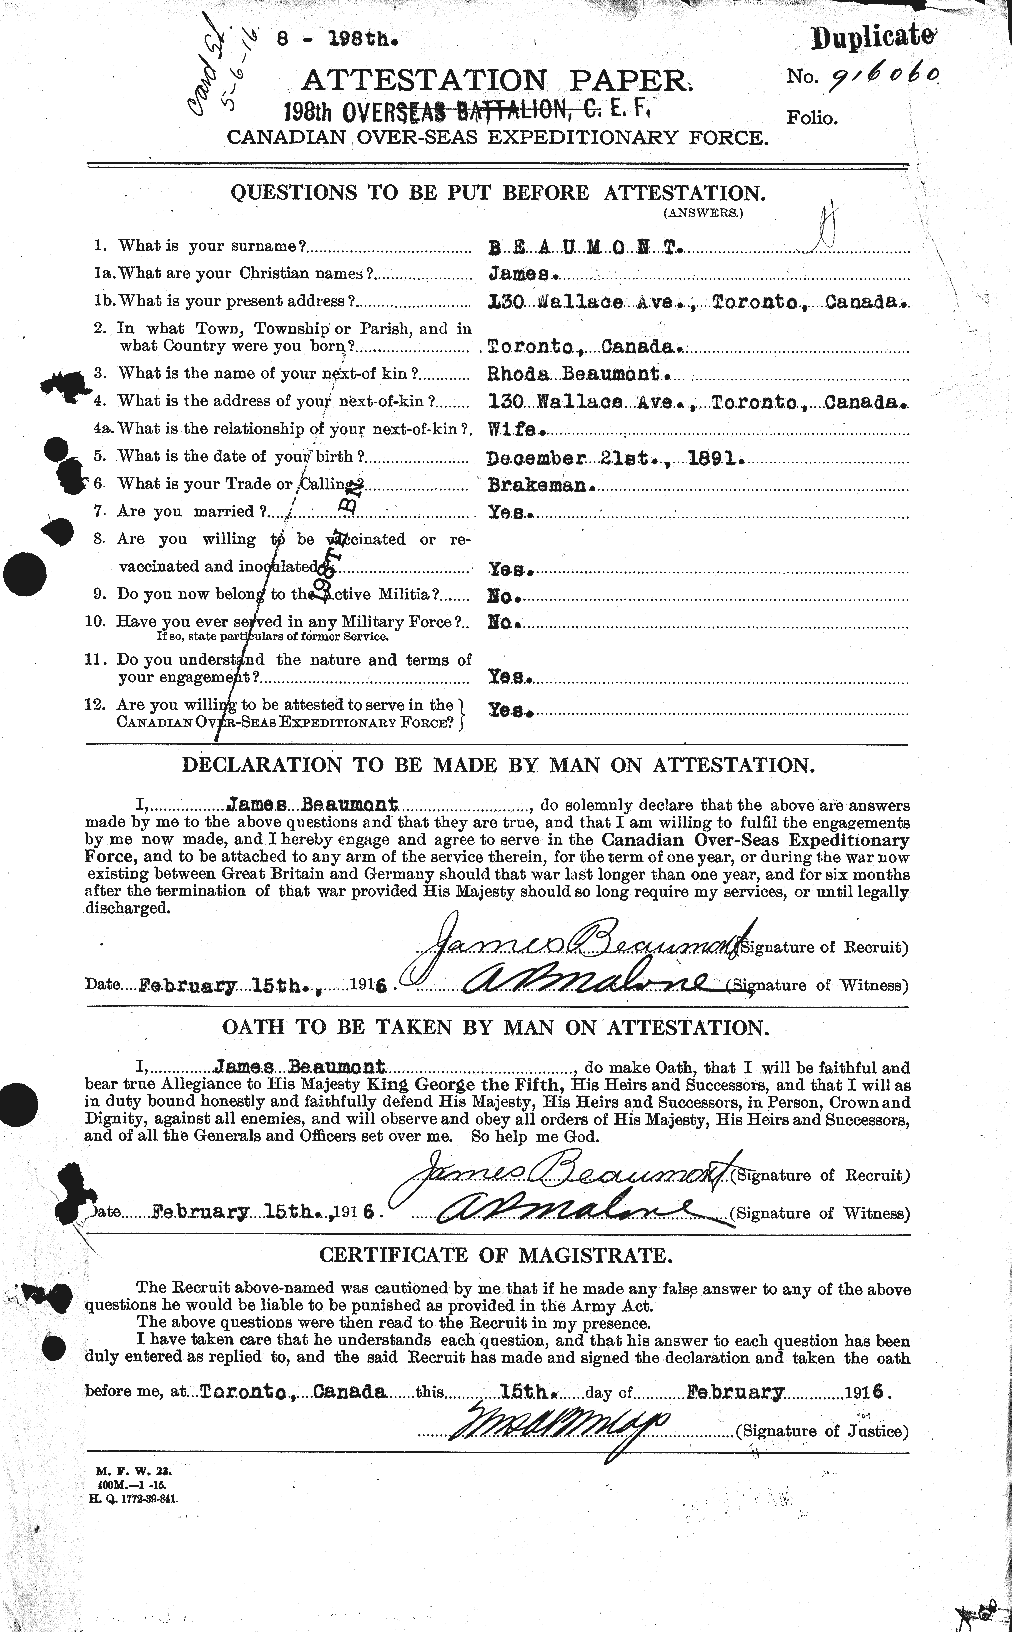 Personnel Records of the First World War - CEF 231683a